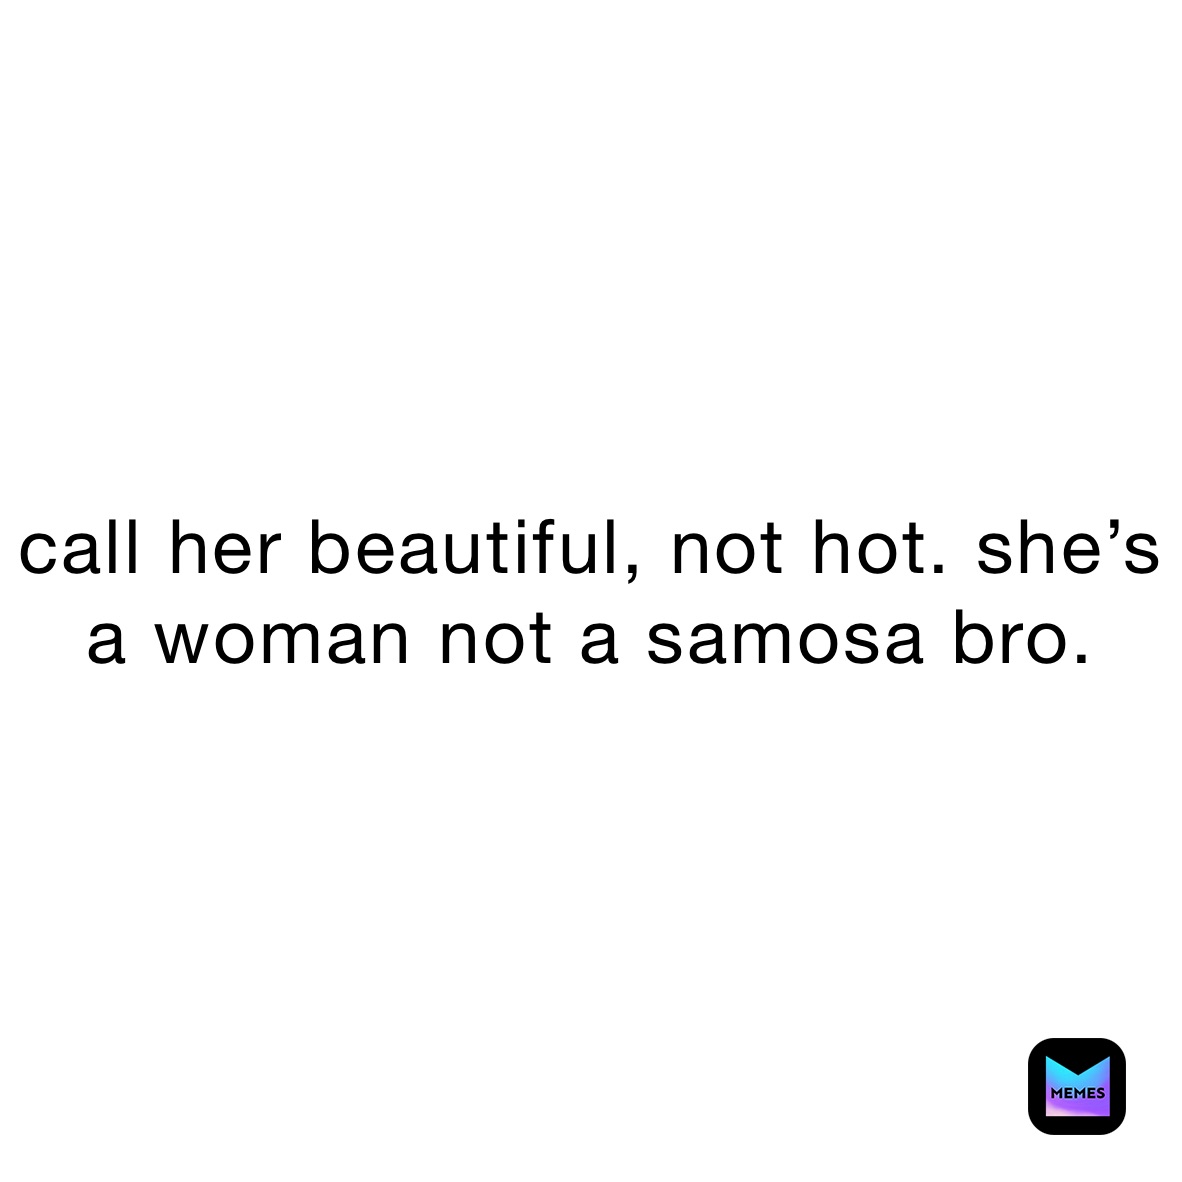 call her beautiful, not hot. she’s a woman not a samosa bro.